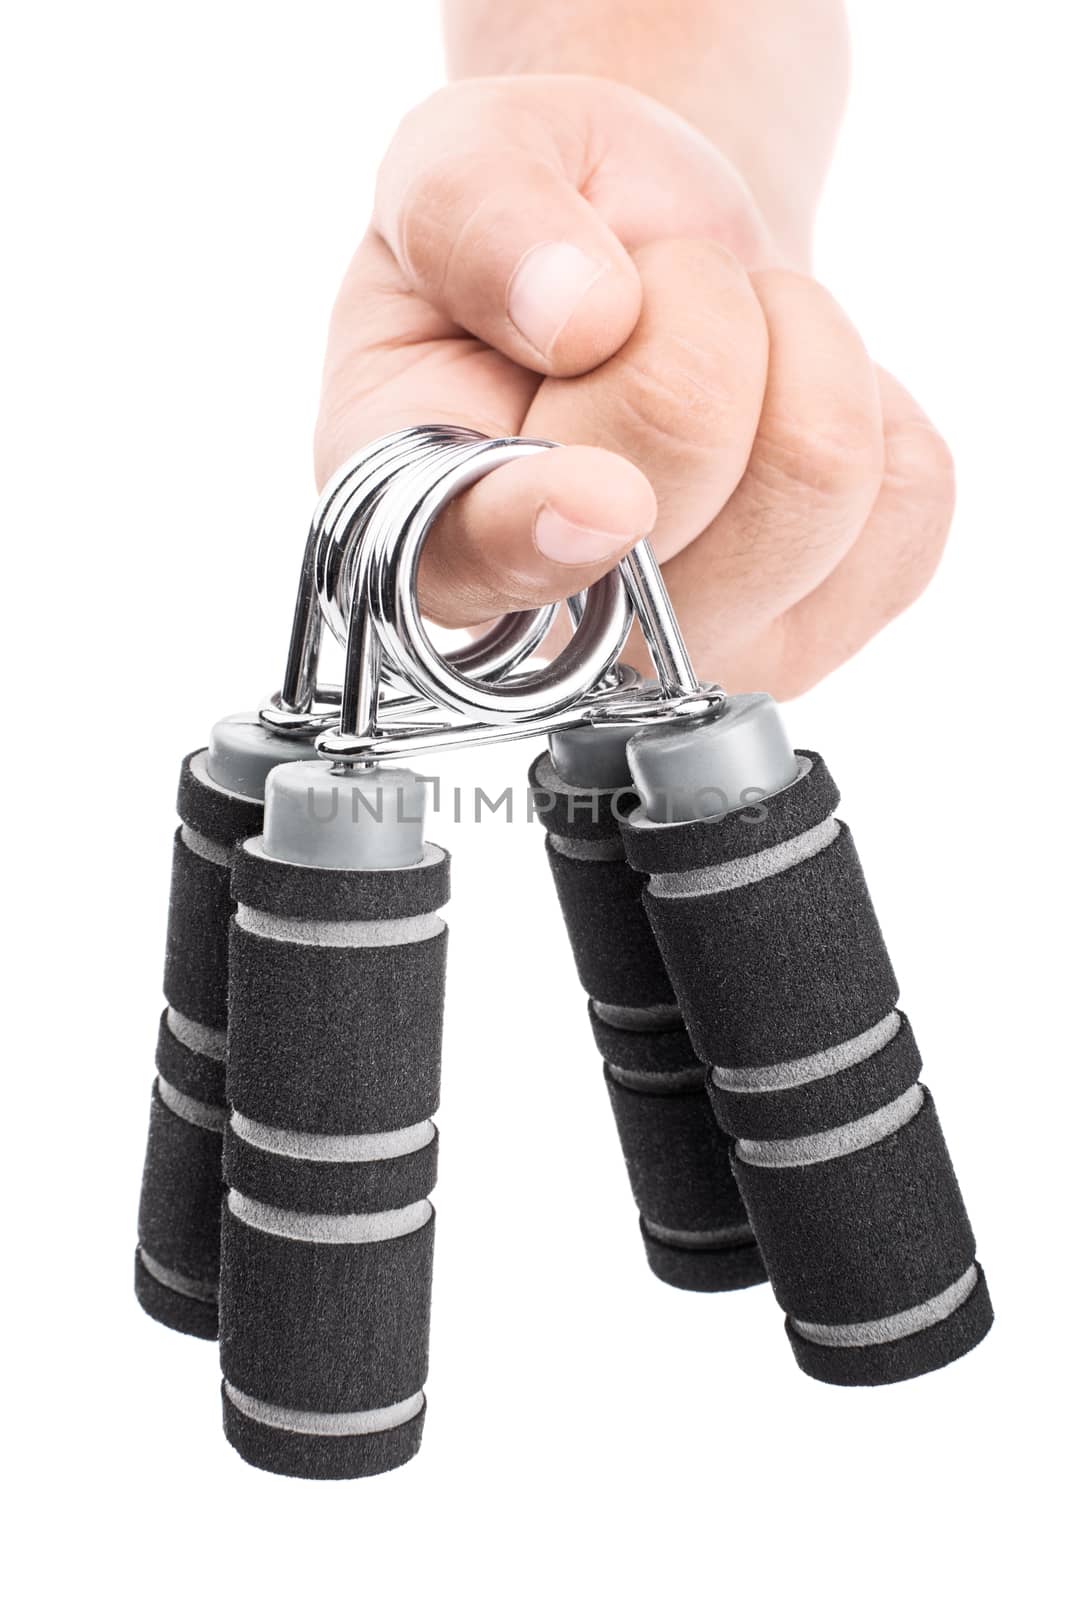 Close-up shot of male hand handing out hand grips, isolated on white background.